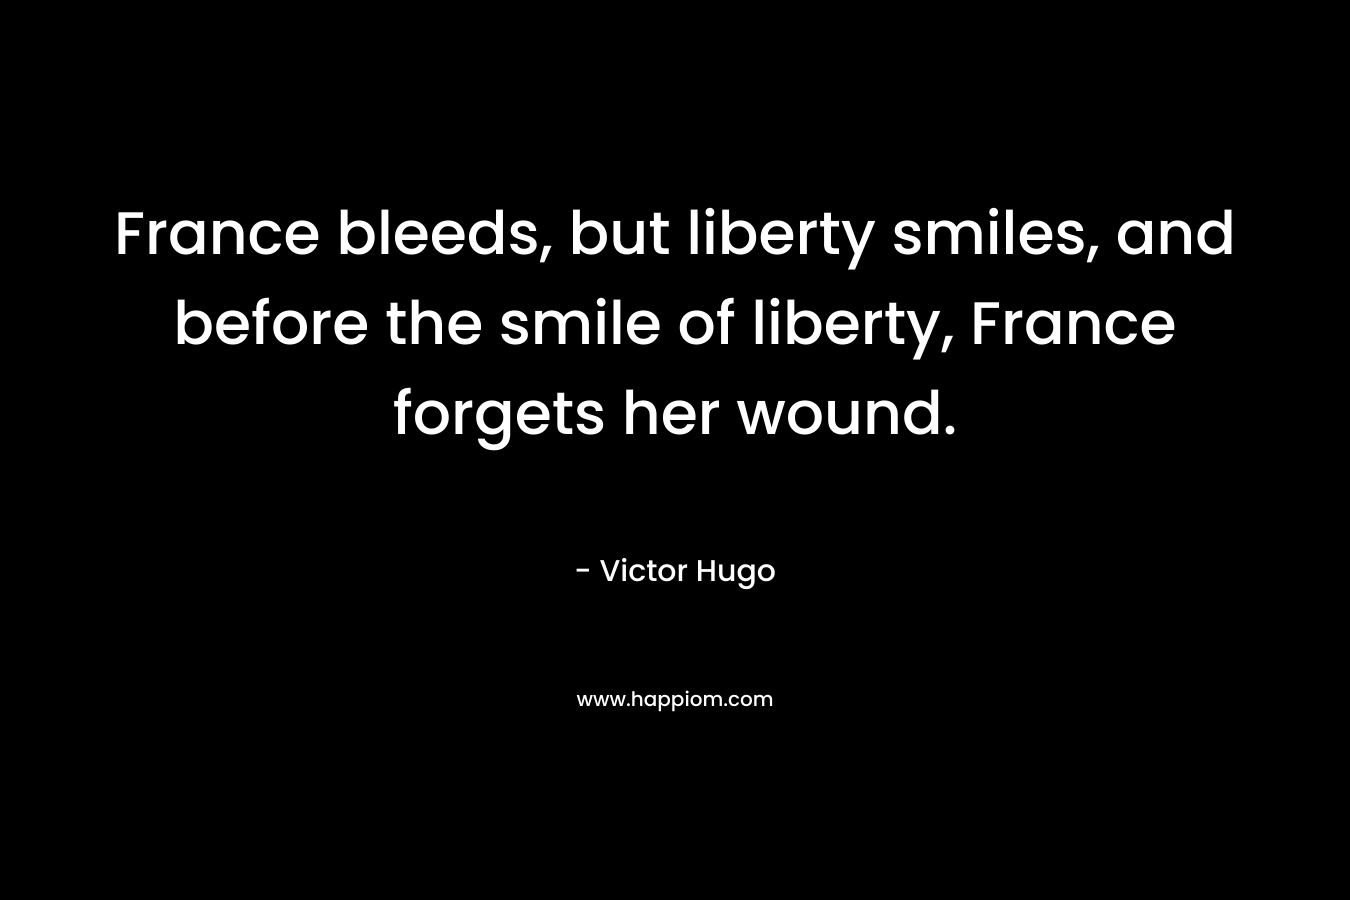 France bleeds, but liberty smiles, and before the smile of liberty, France forgets her wound. – Victor Hugo